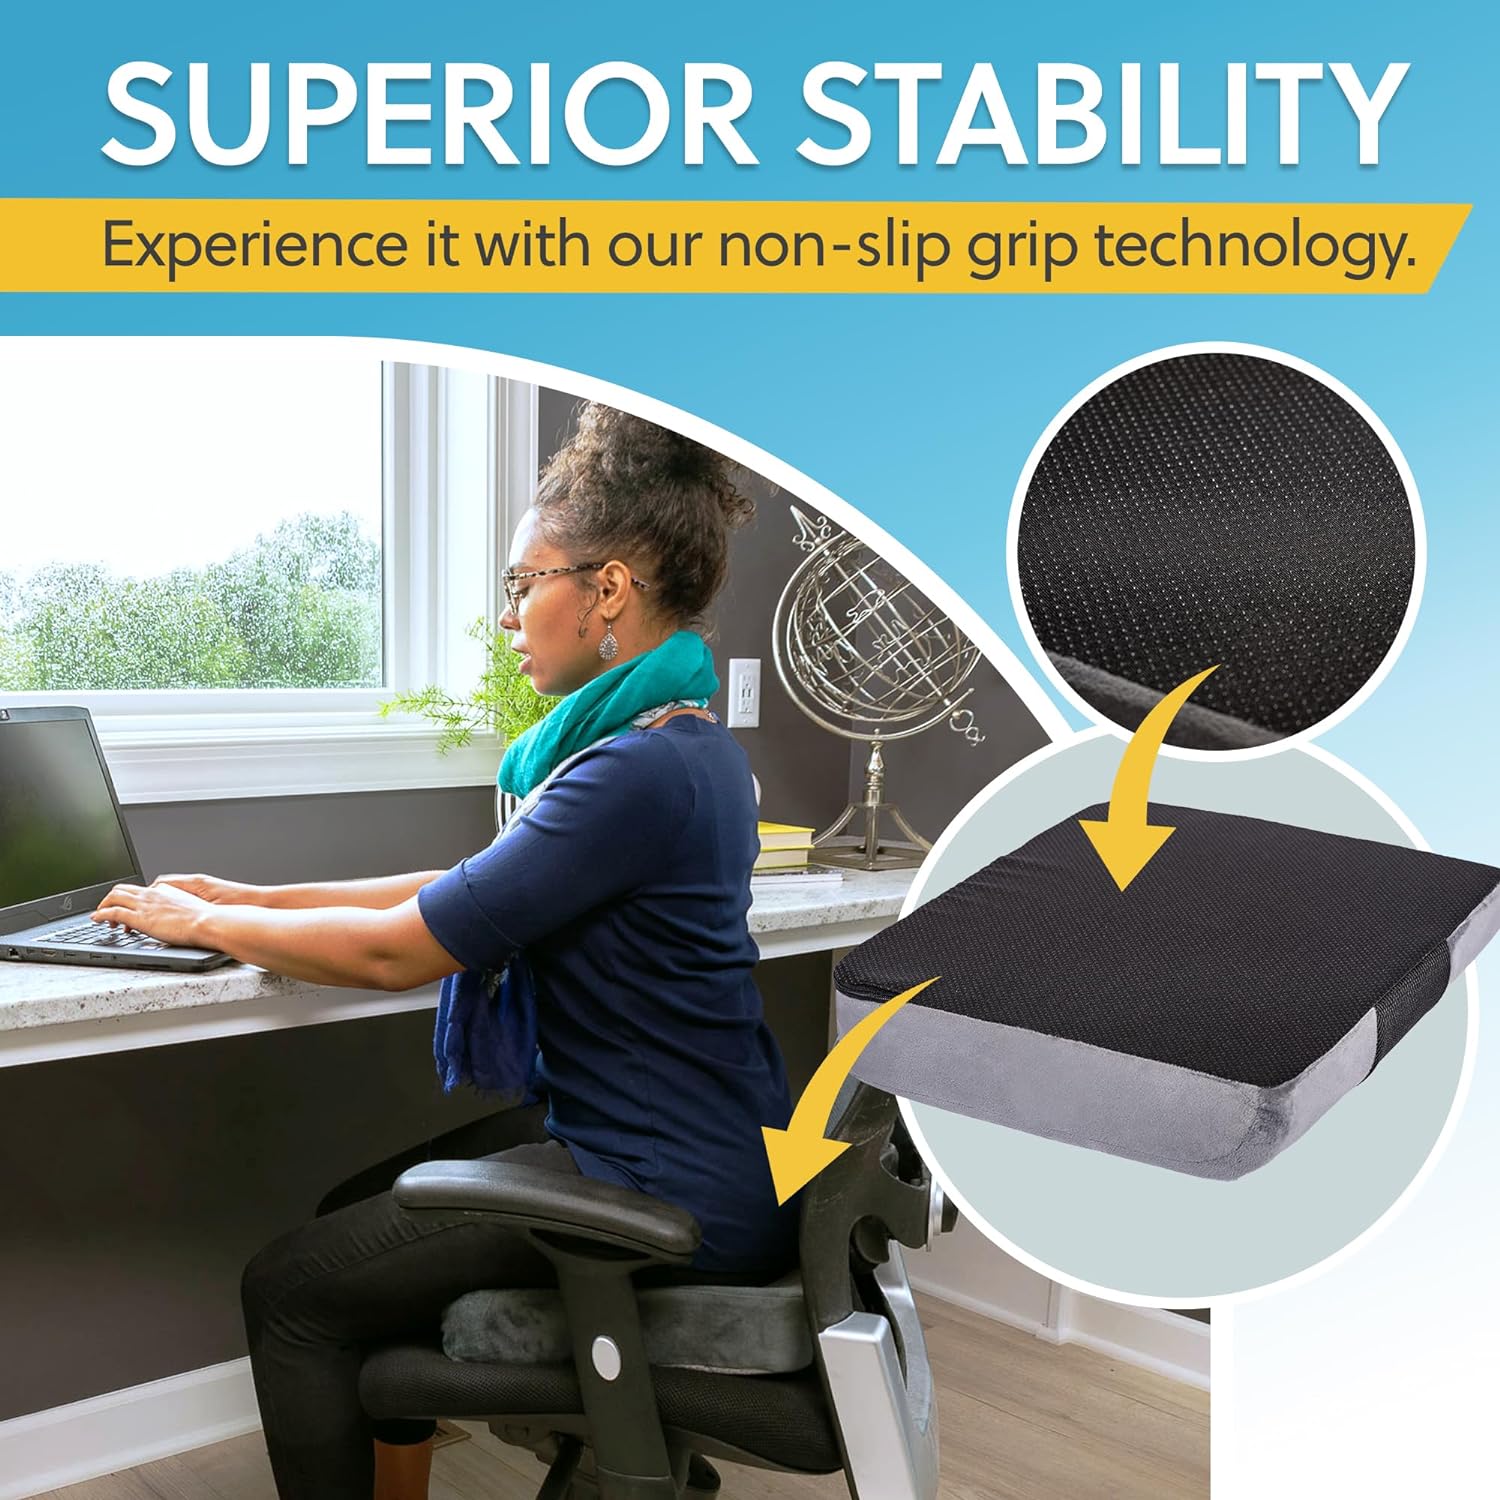 Large Seat Cushion for Wheelchairs, Office Chairs and Recliners - 19.5 x 17 x 3.5 Inch Large and Soft Cushion for Users up to 300lbs - Relieves Sciatica, Tailbone and Back Pain